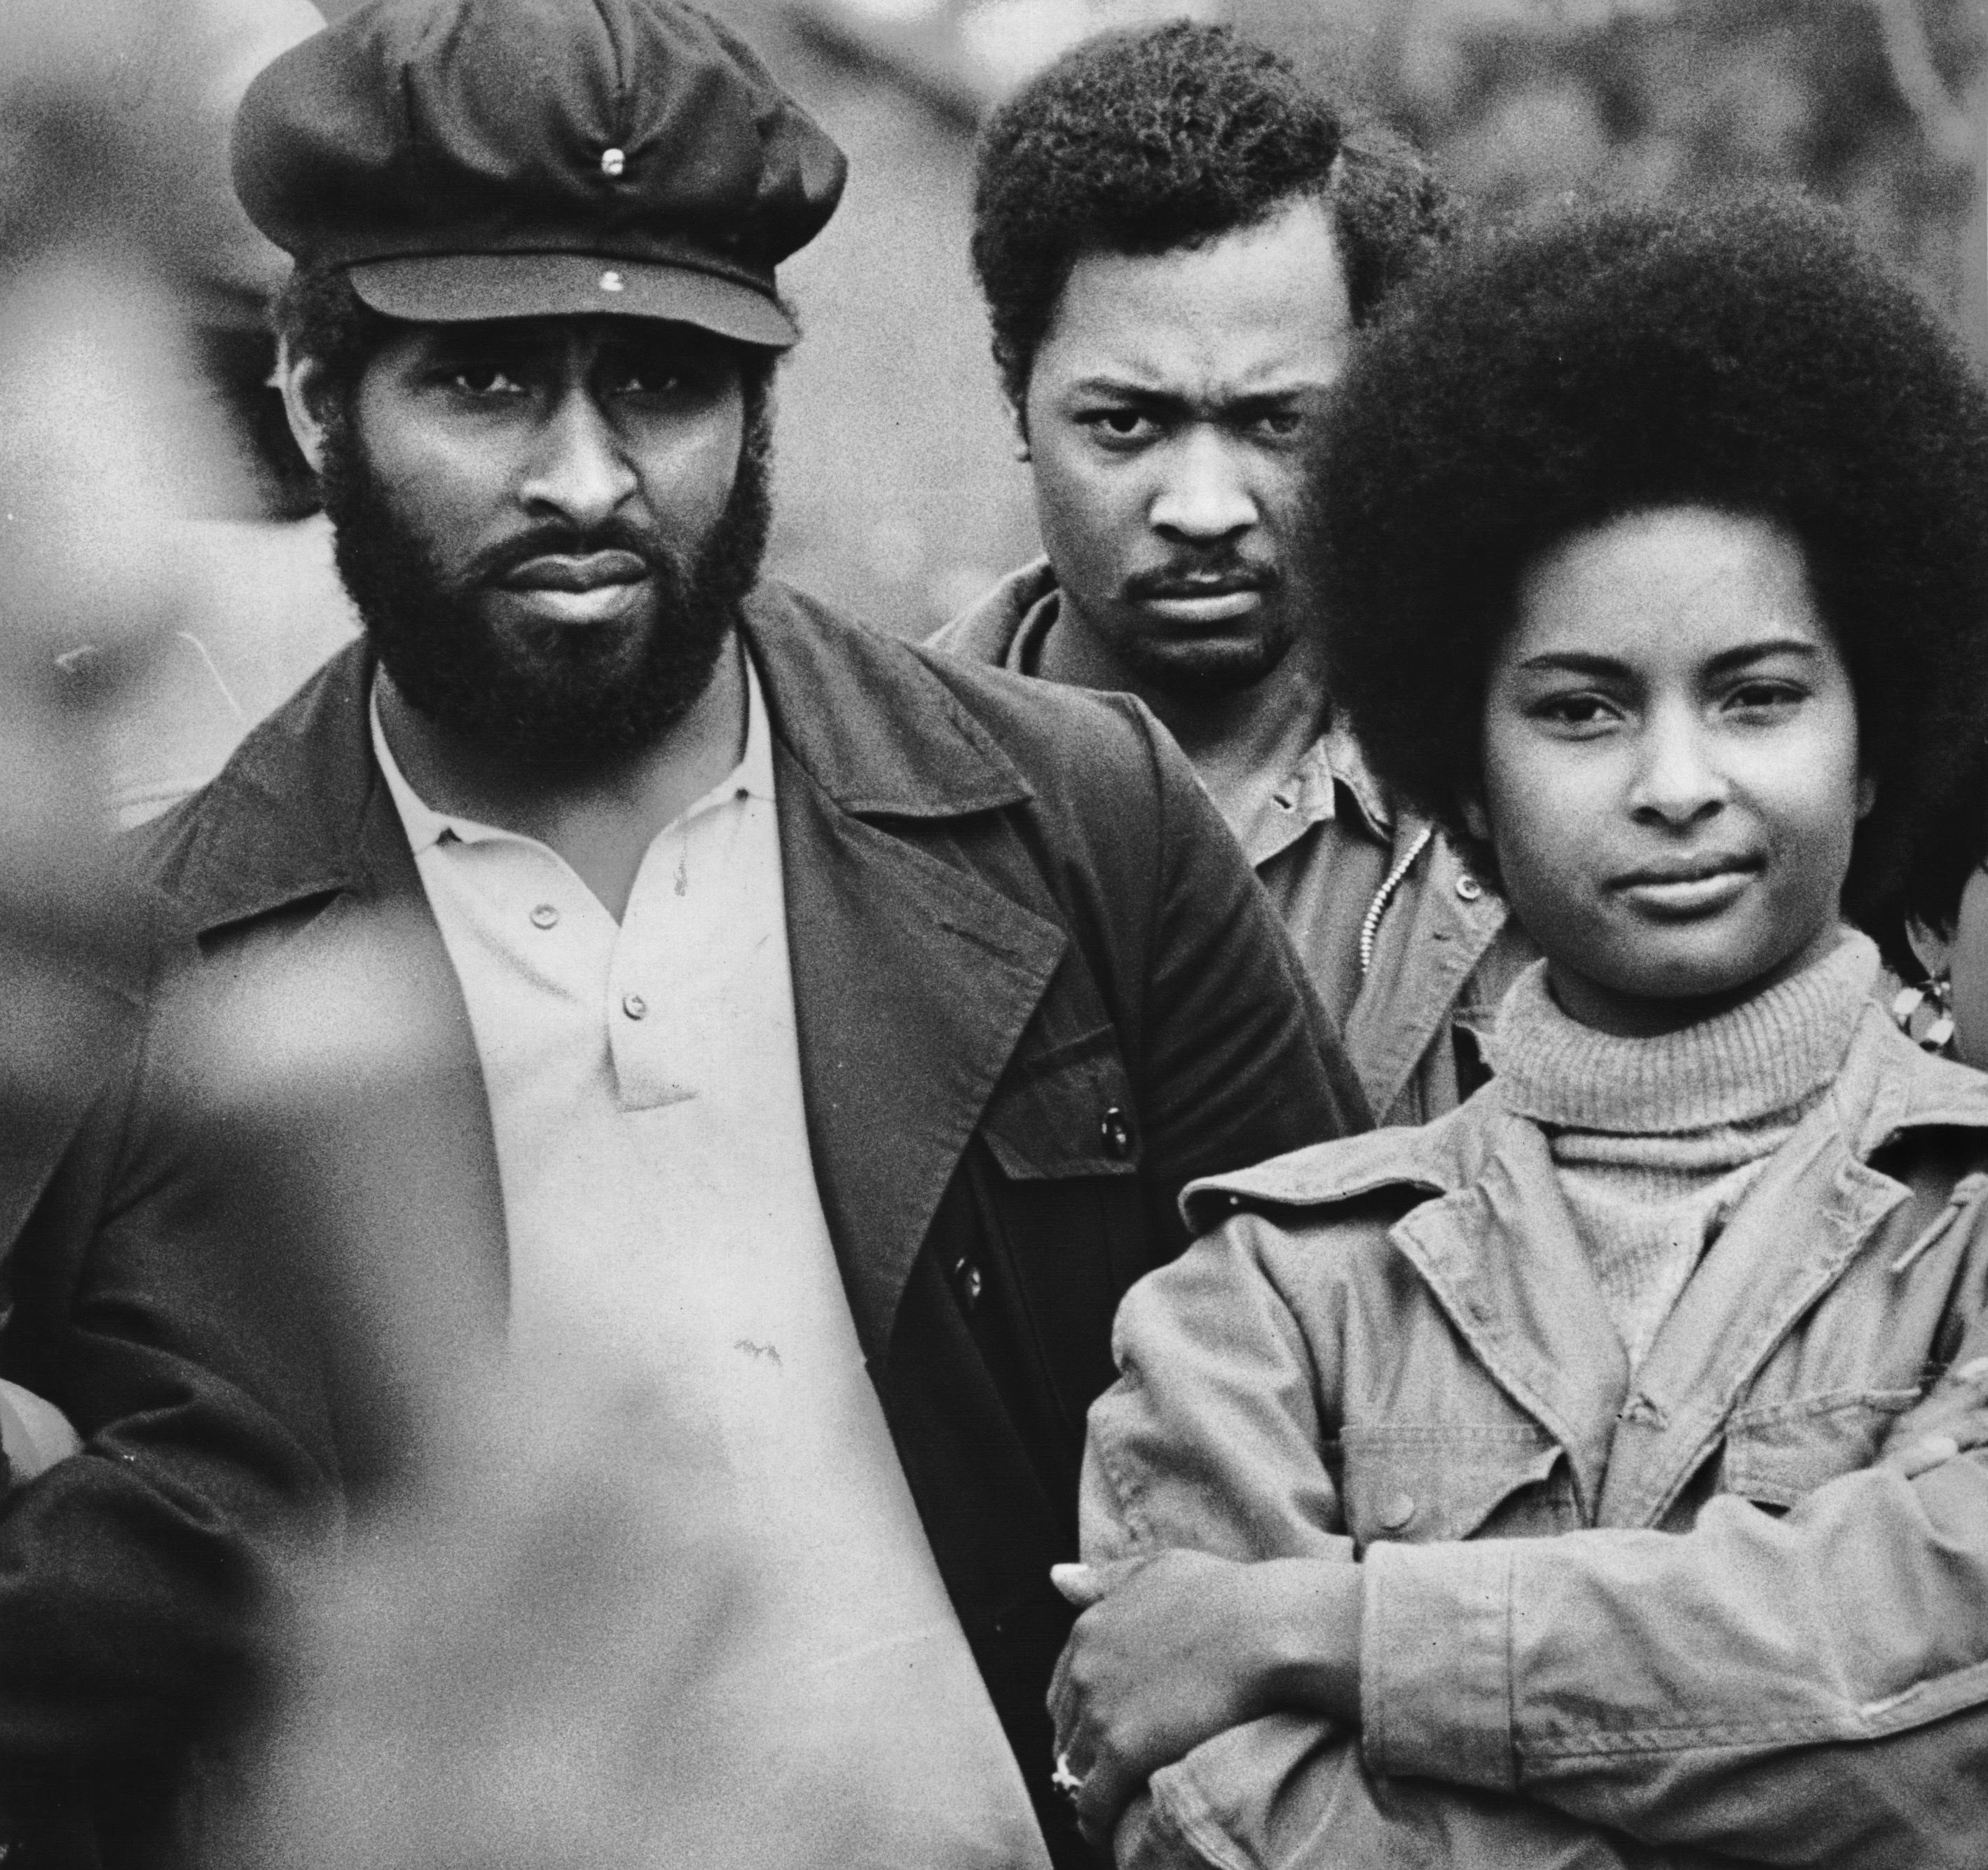 Long before 'Defund Police' movement, Portland's Black Panthers